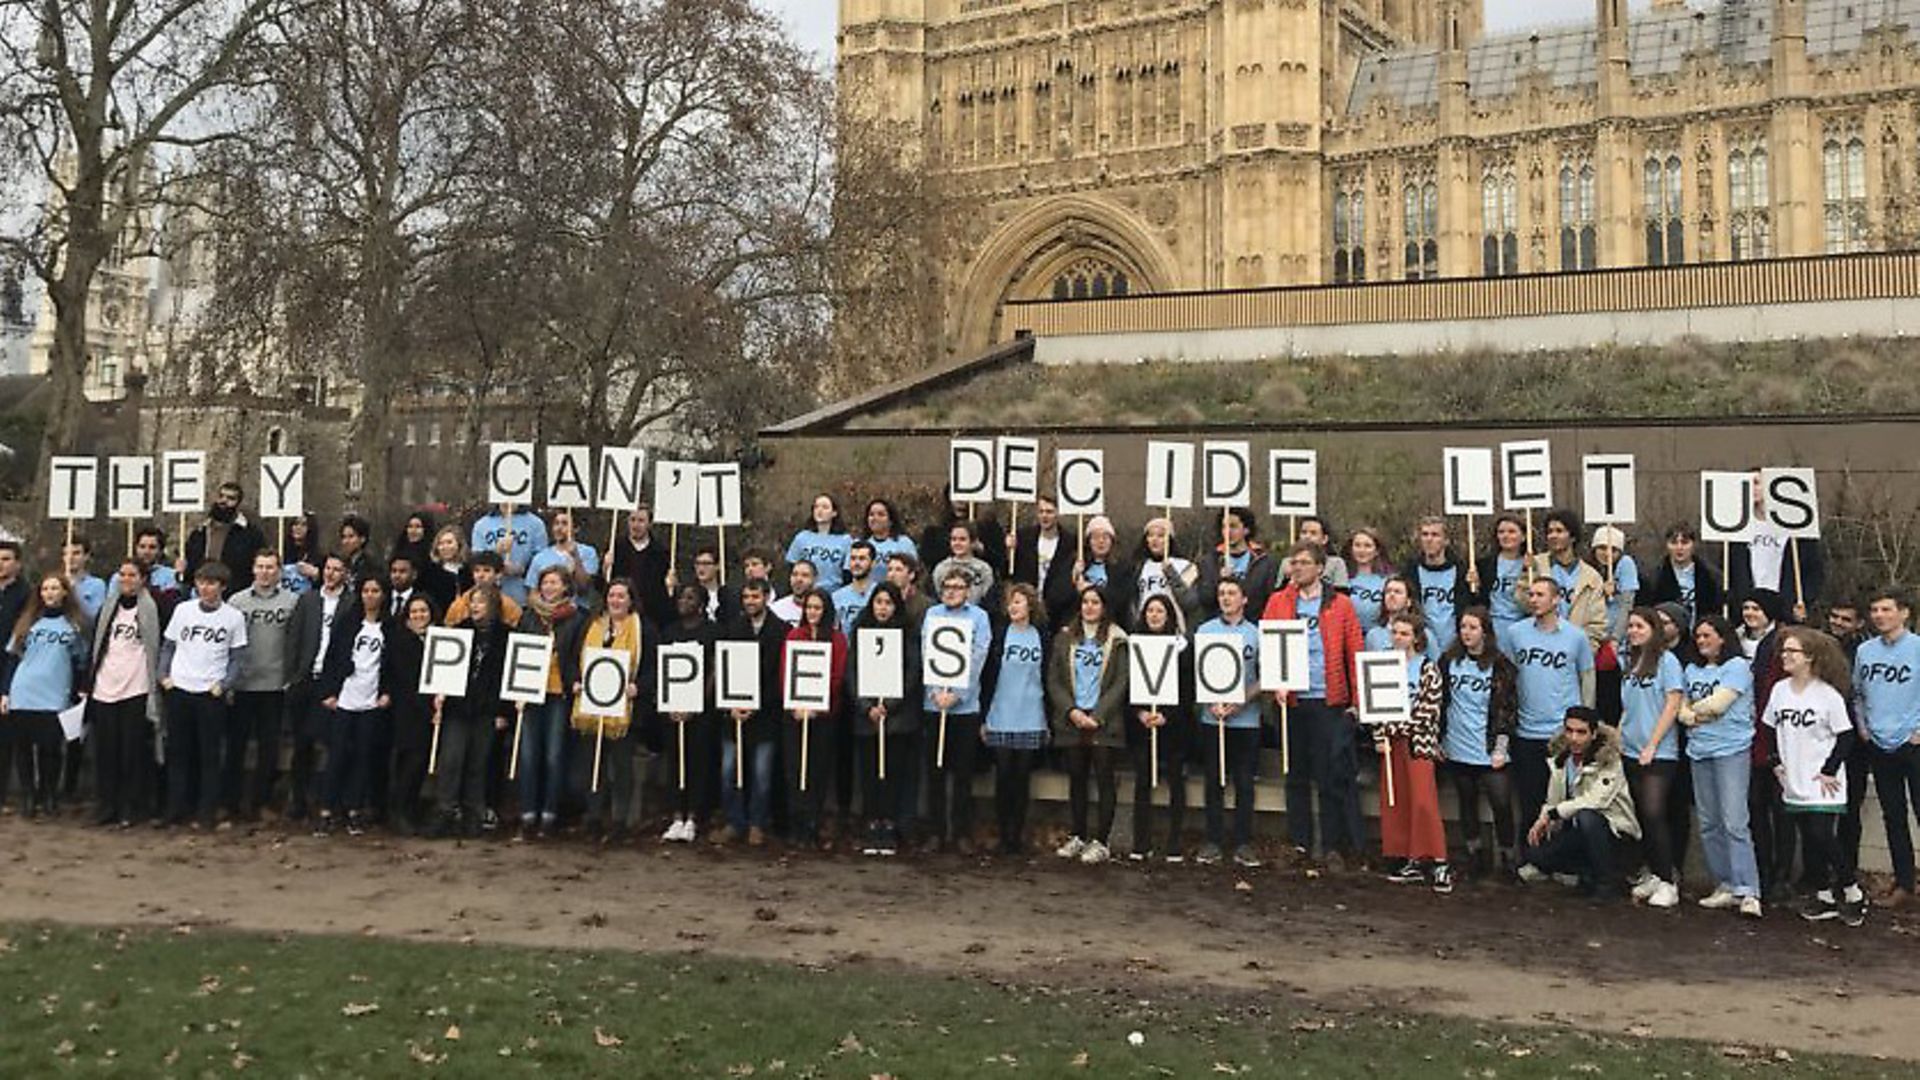 They can't decide - let us. People's Vote campaigners from Our Future Our Choice and For our Future's Sake outside the Houses of Parliament. Photograph: Our Future Our Choice. - Credit: Archant